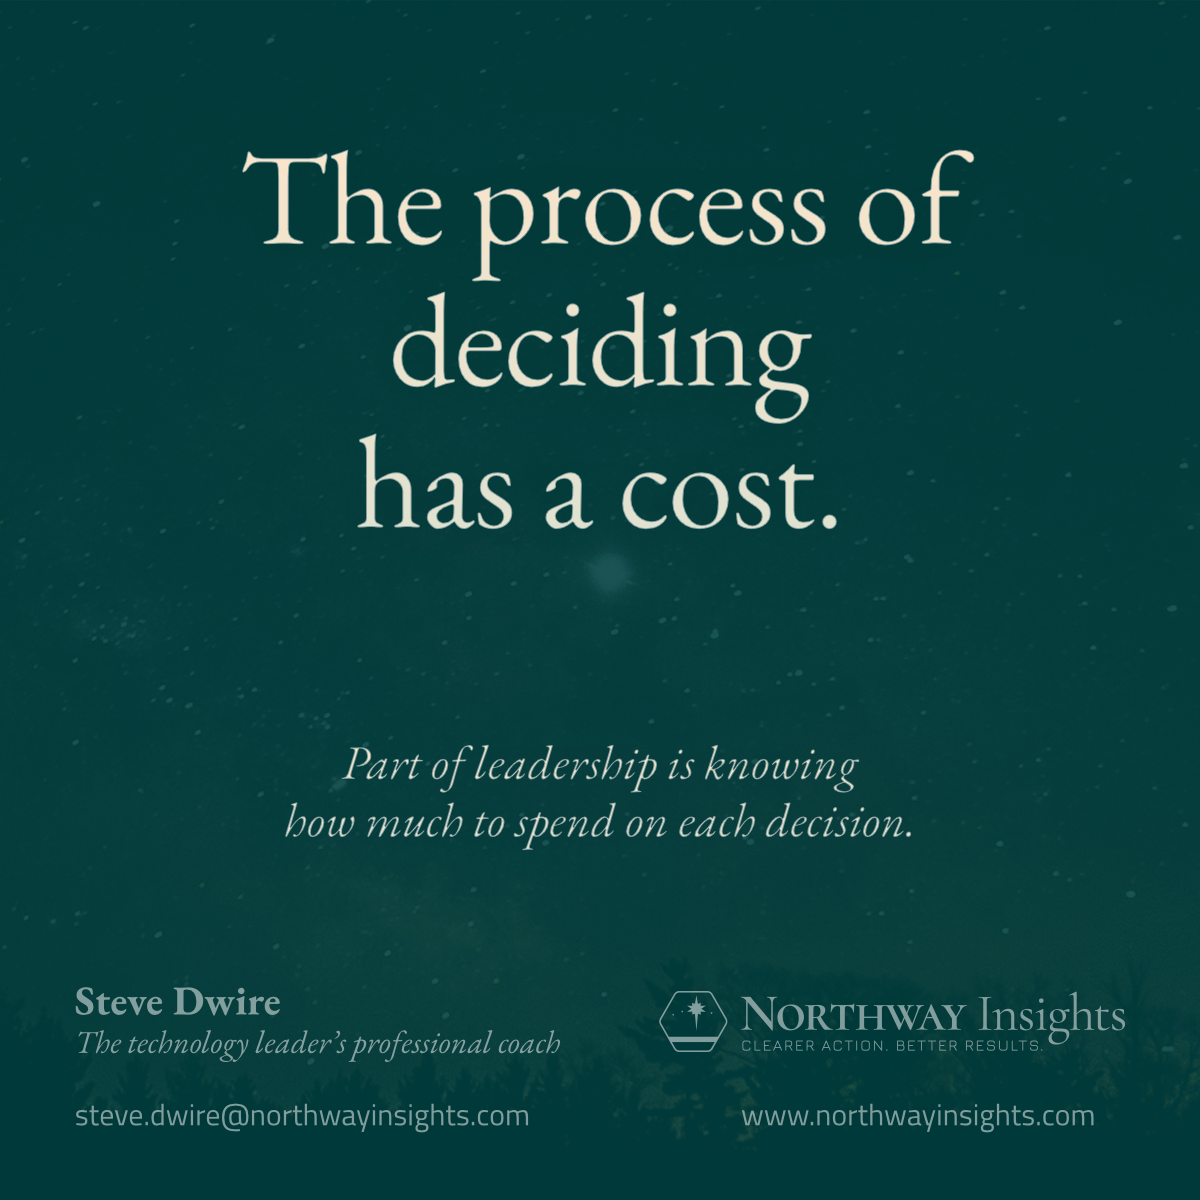 The process of deciding has a cost. (Part of leadership is knowing how much to spend on each decision.)